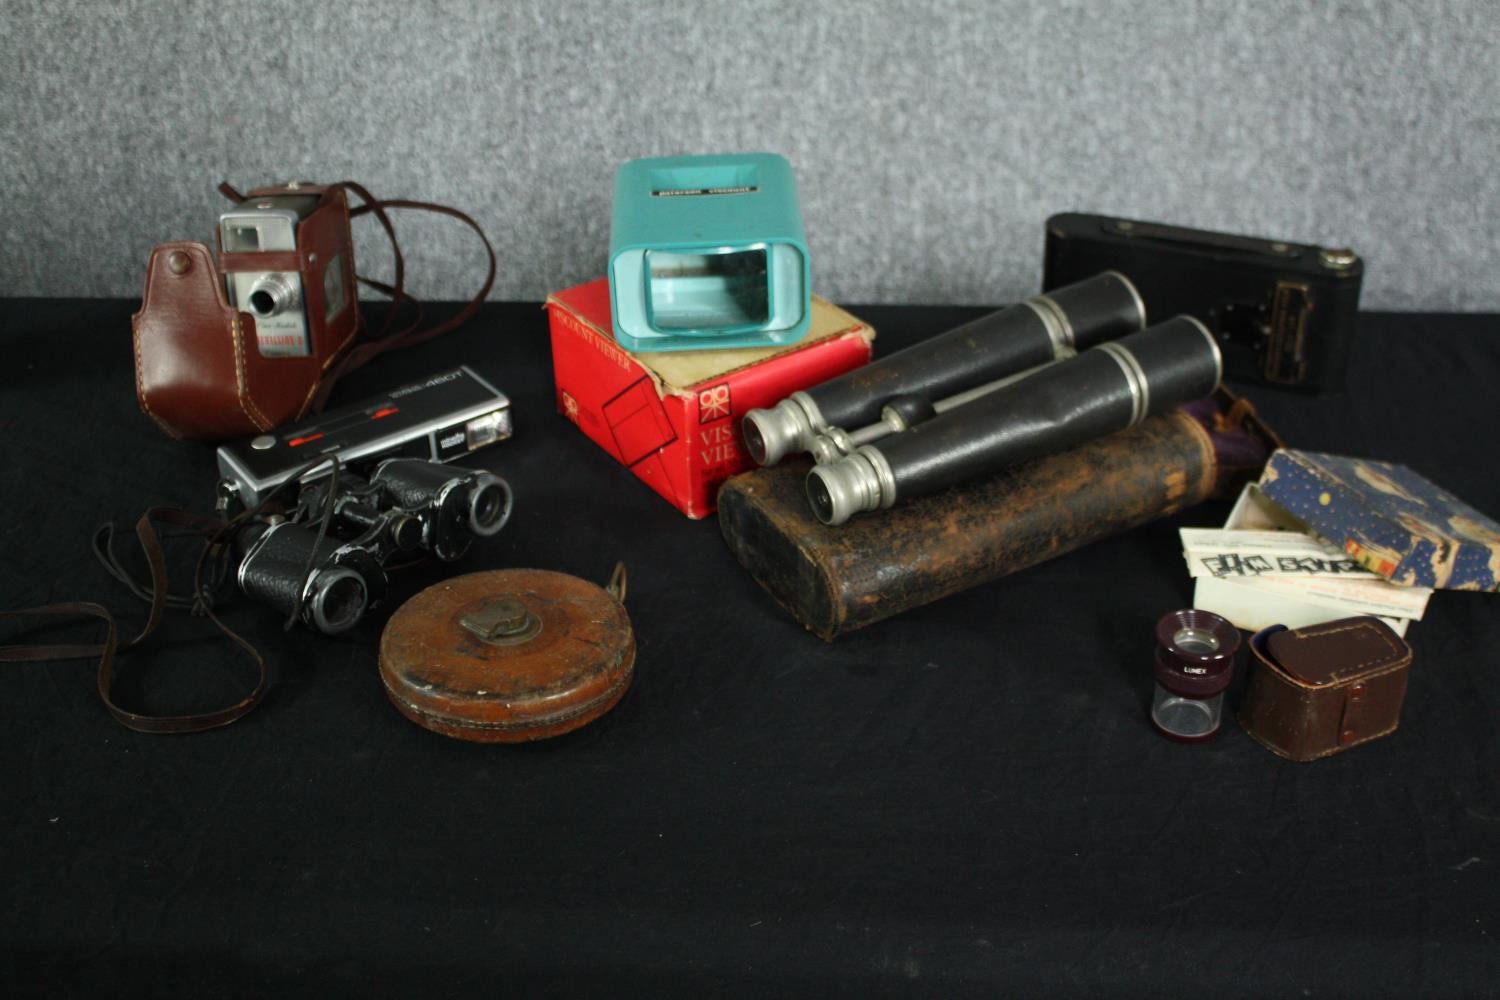 A collection of photographic and cinematic equipment and binoculars. Includes a Minolta Pocket